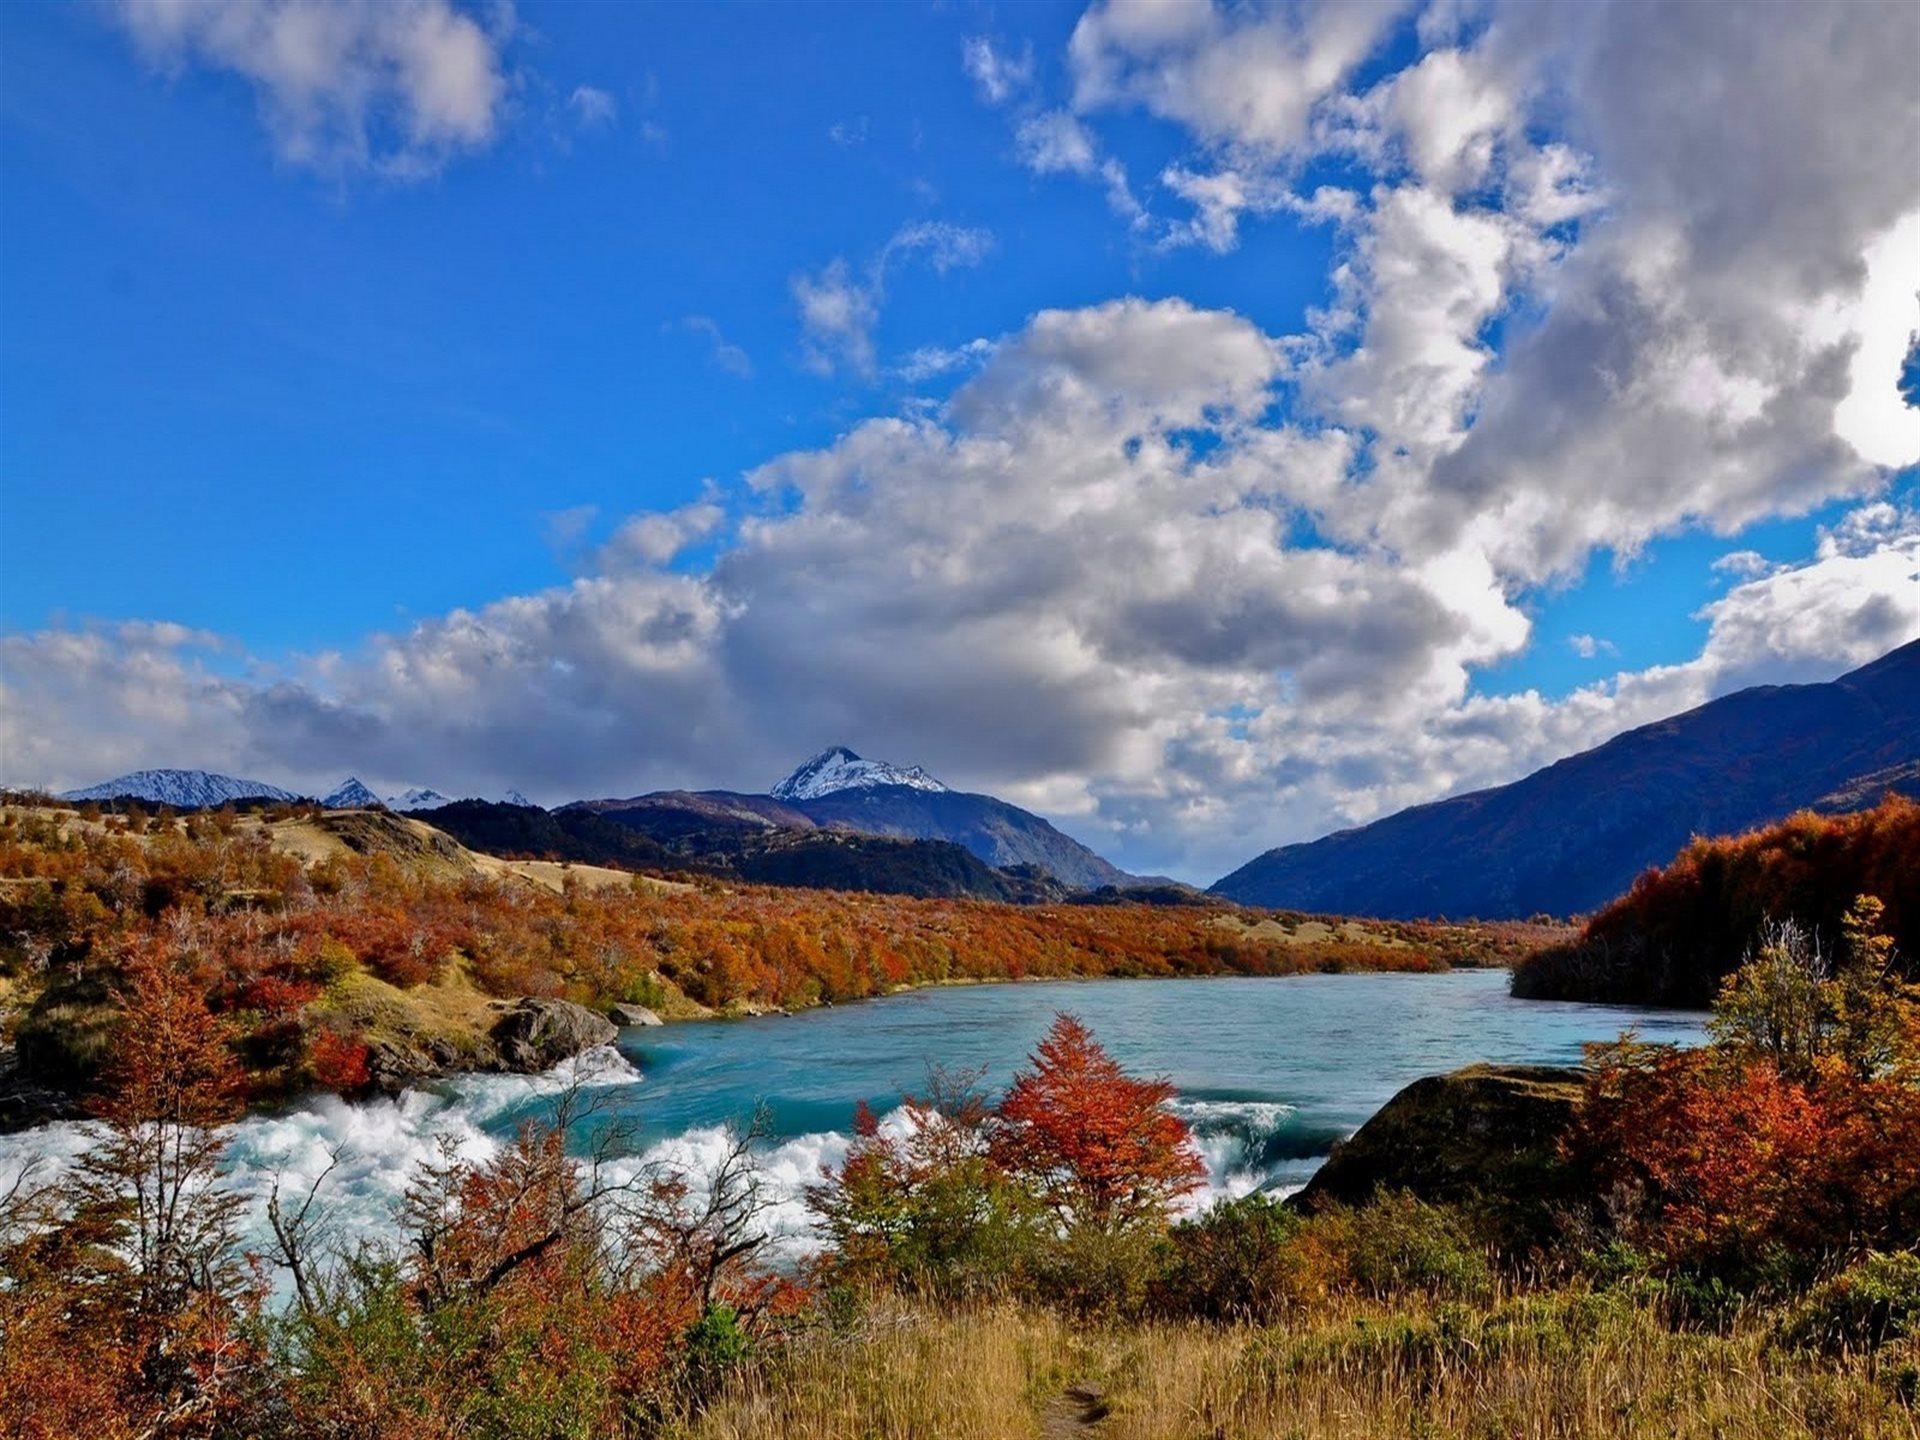 Download wallpaper morning, fall, chile, clouds, snowy peak